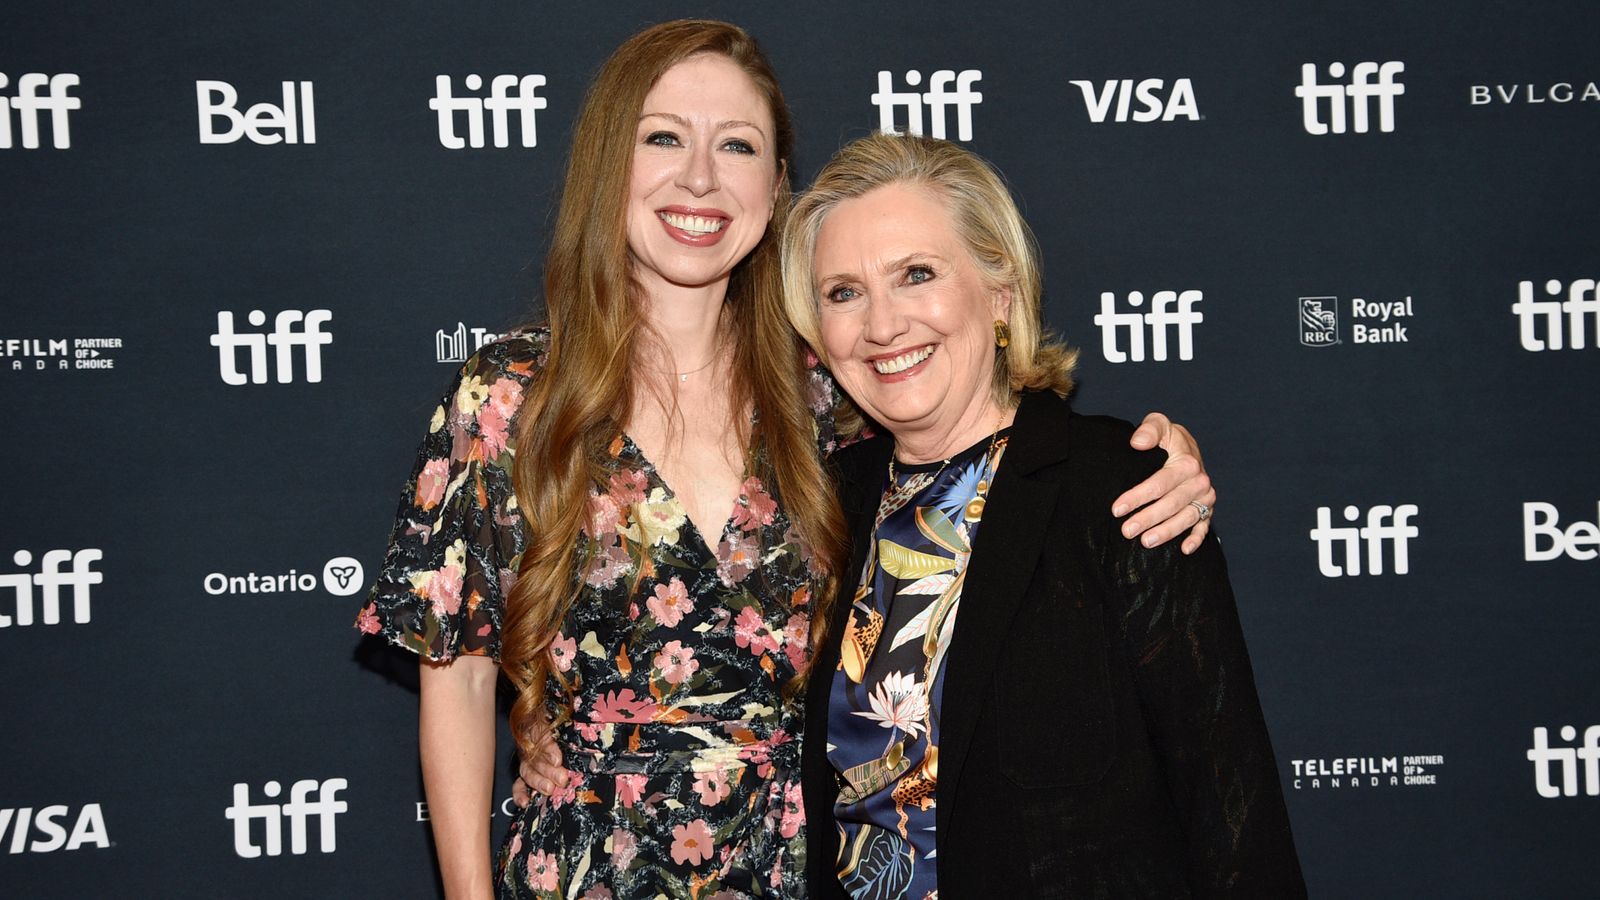 Chelsea Clinton says her family is 'the reason Fox News was created'